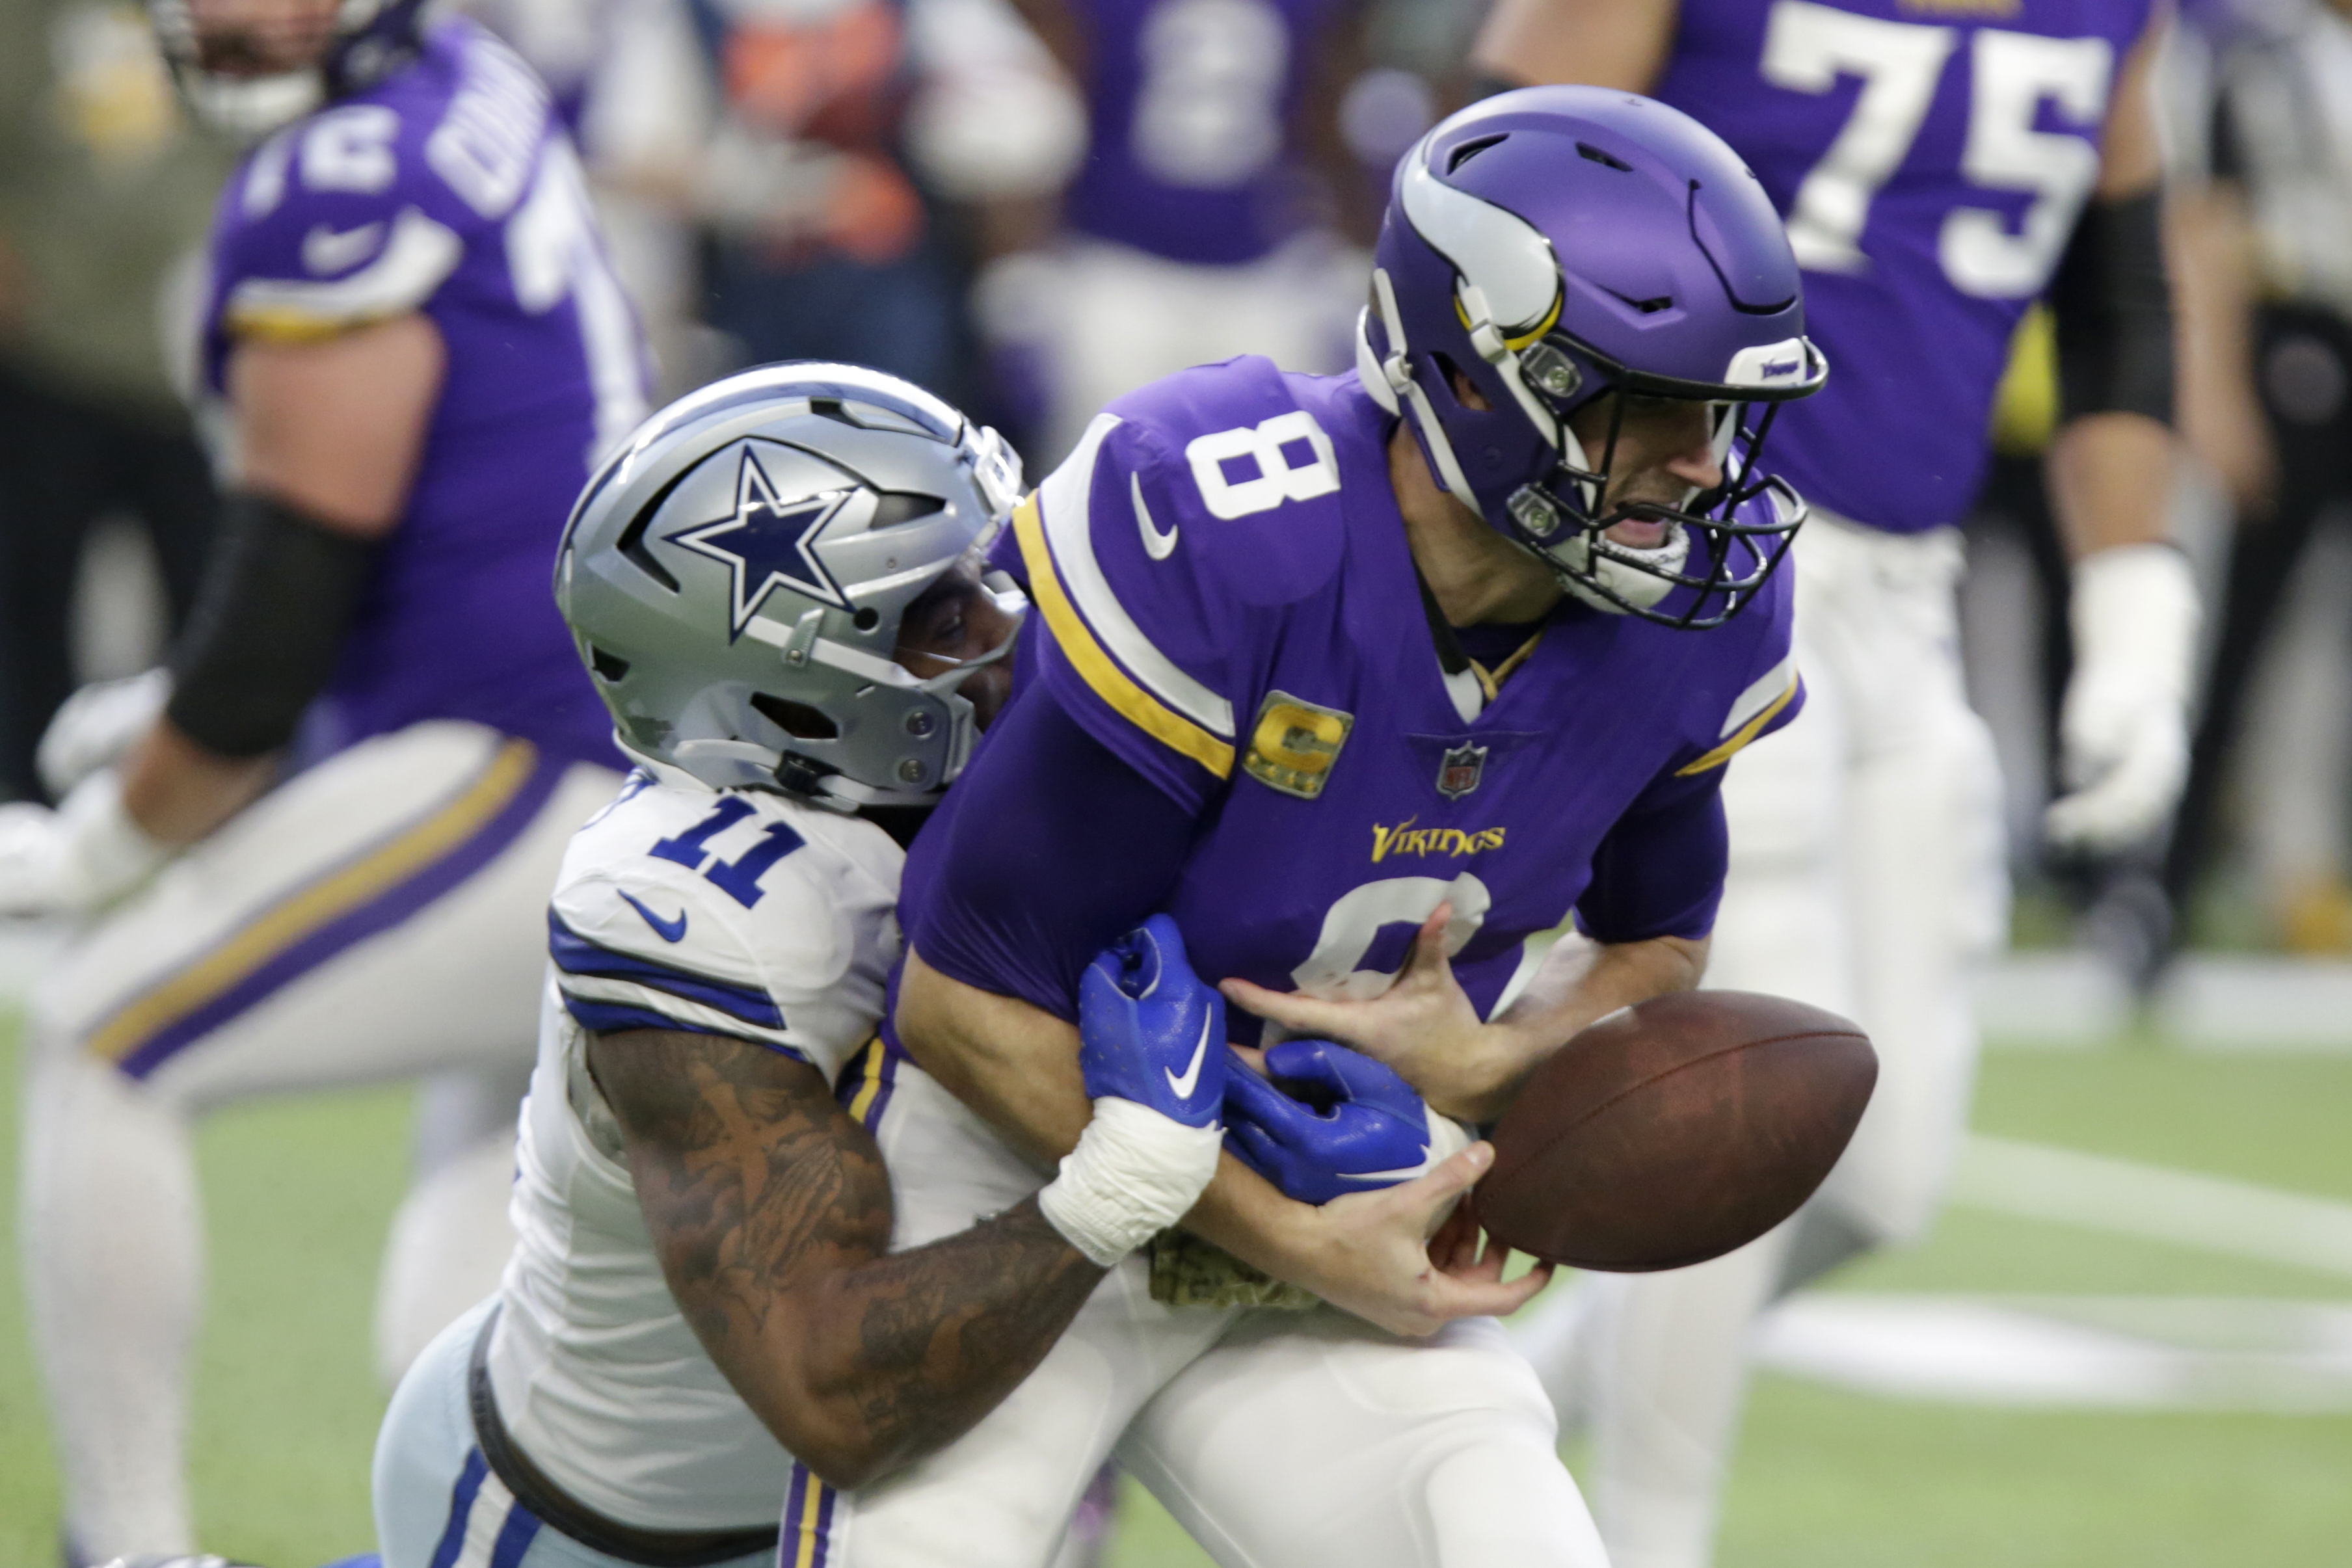 NFL playoff picture: Lots of shuffling likely before Vikings know